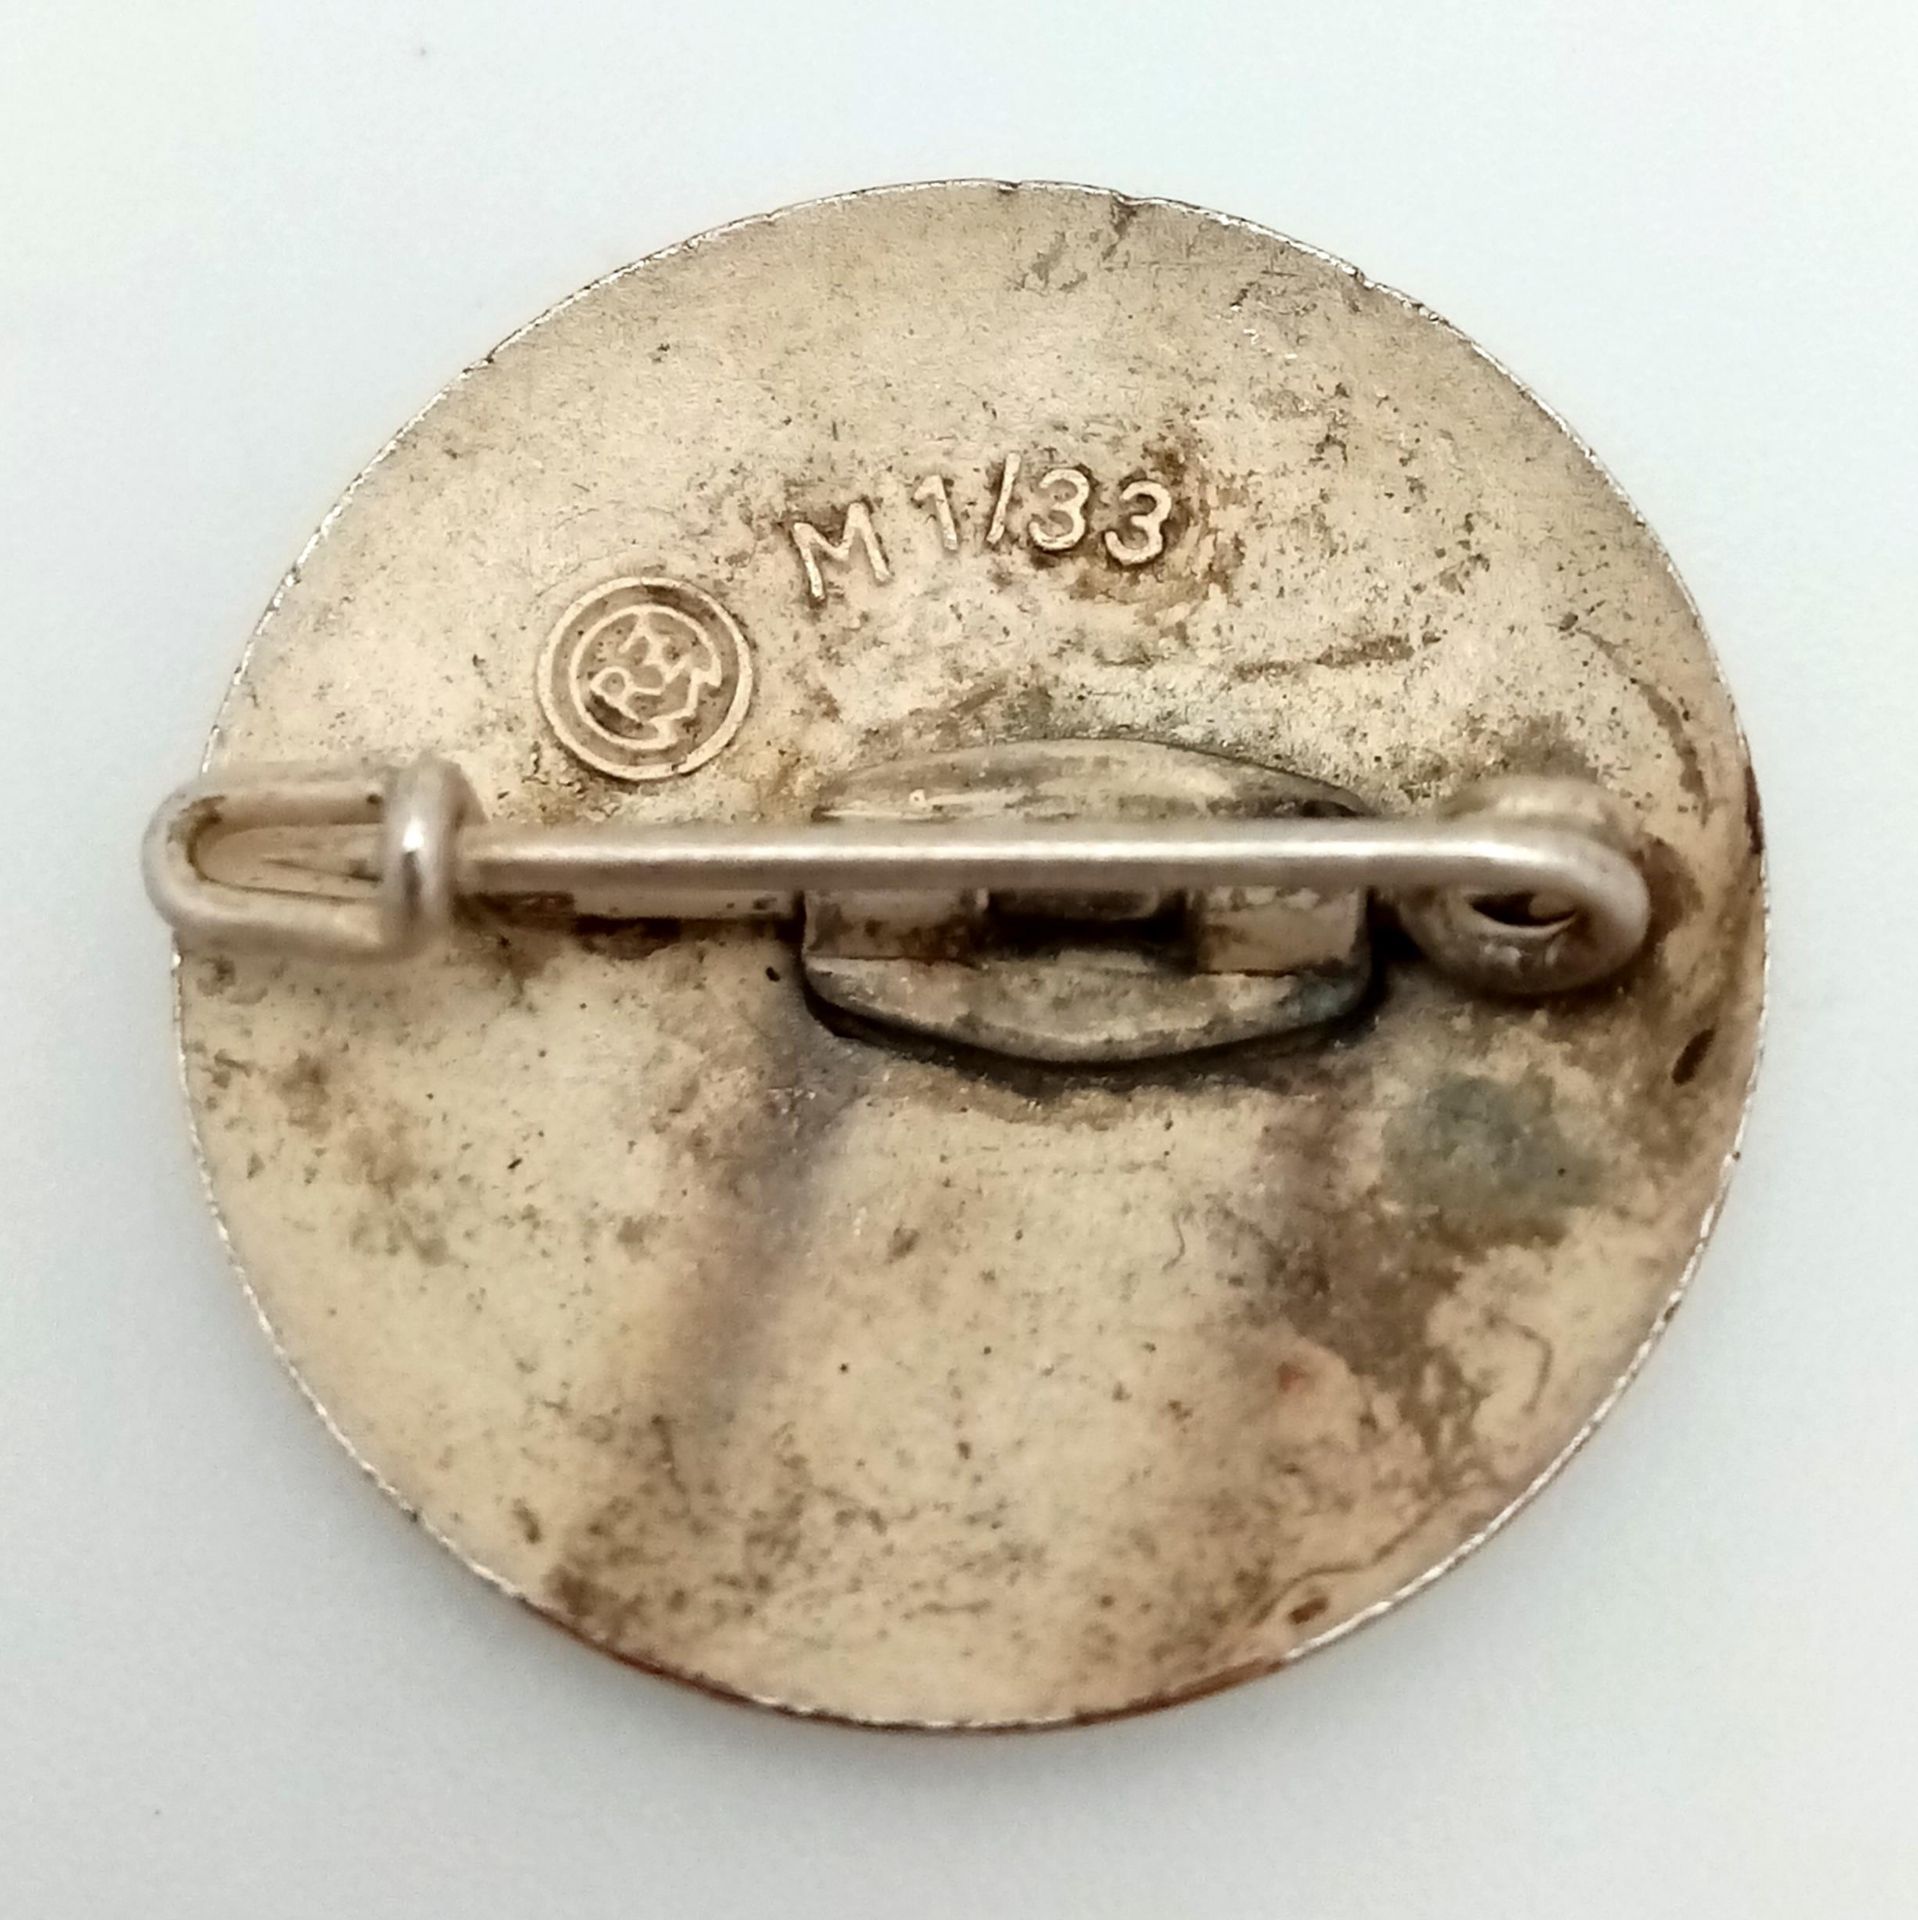 3rd Reich N.S Student “Kampfhilfe” Combat Aid Pin, given to Students who helped with the War Effort. - Image 3 of 3